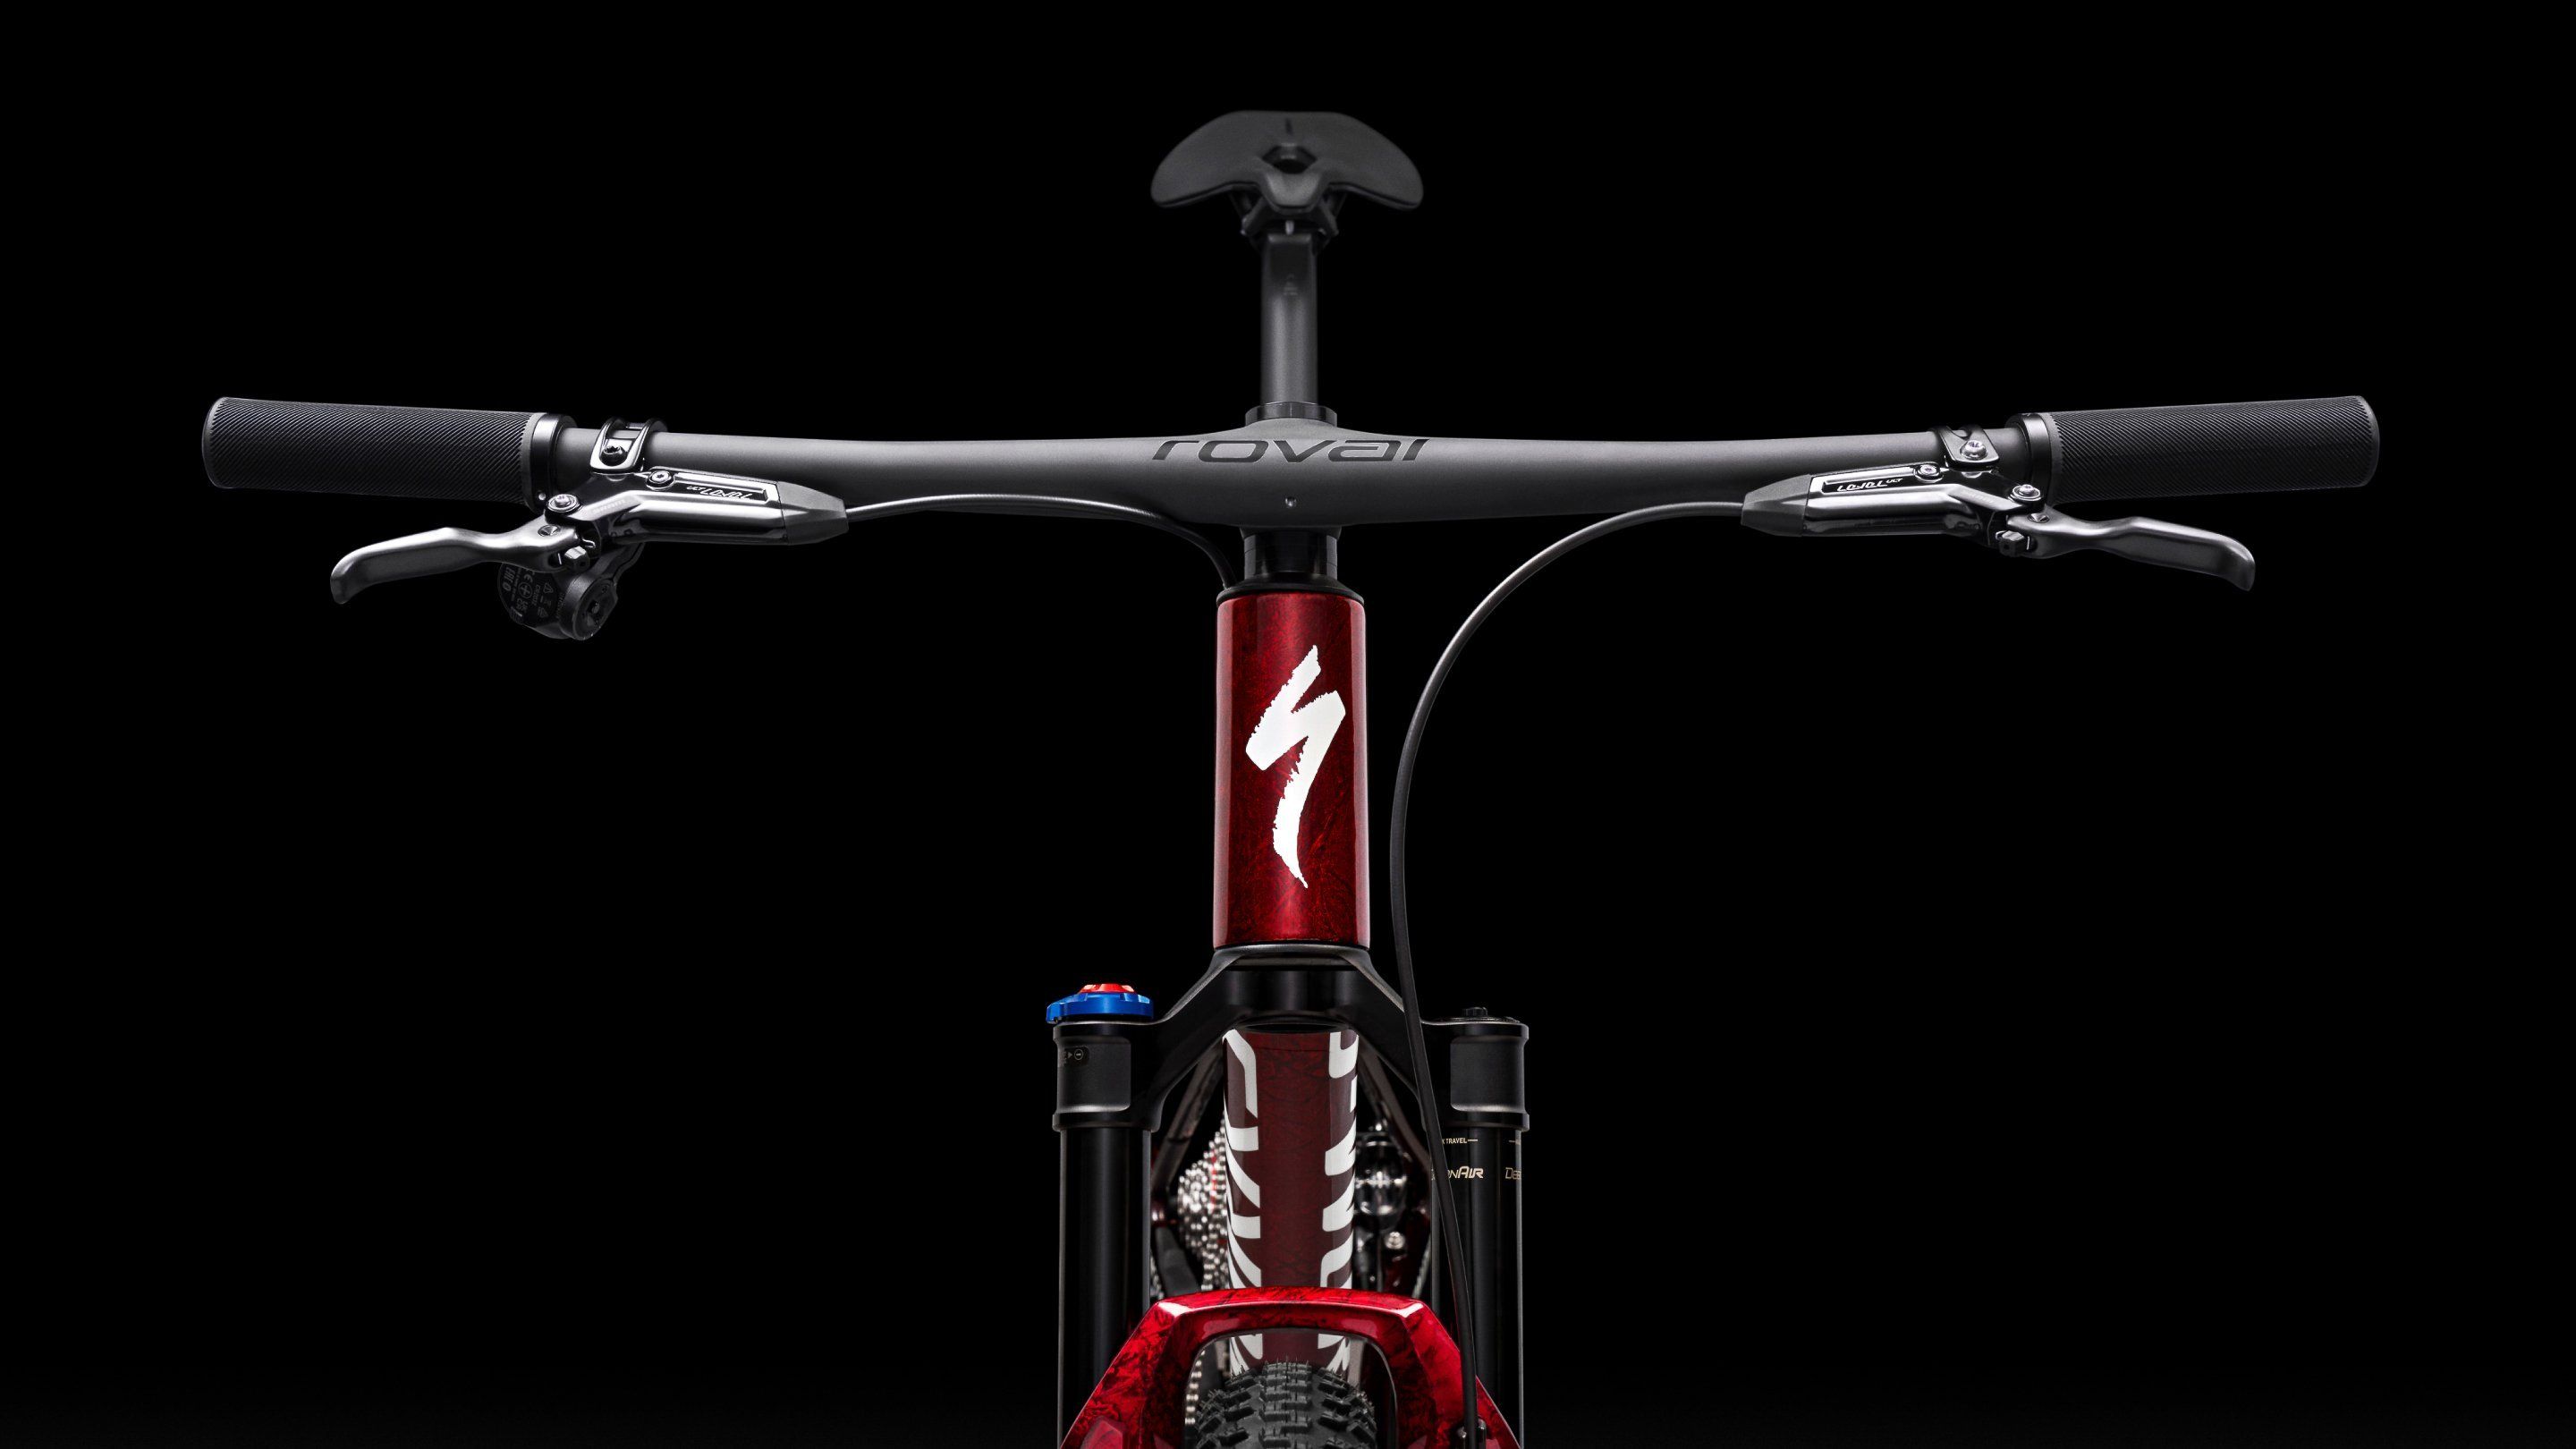 s-works epic world cup